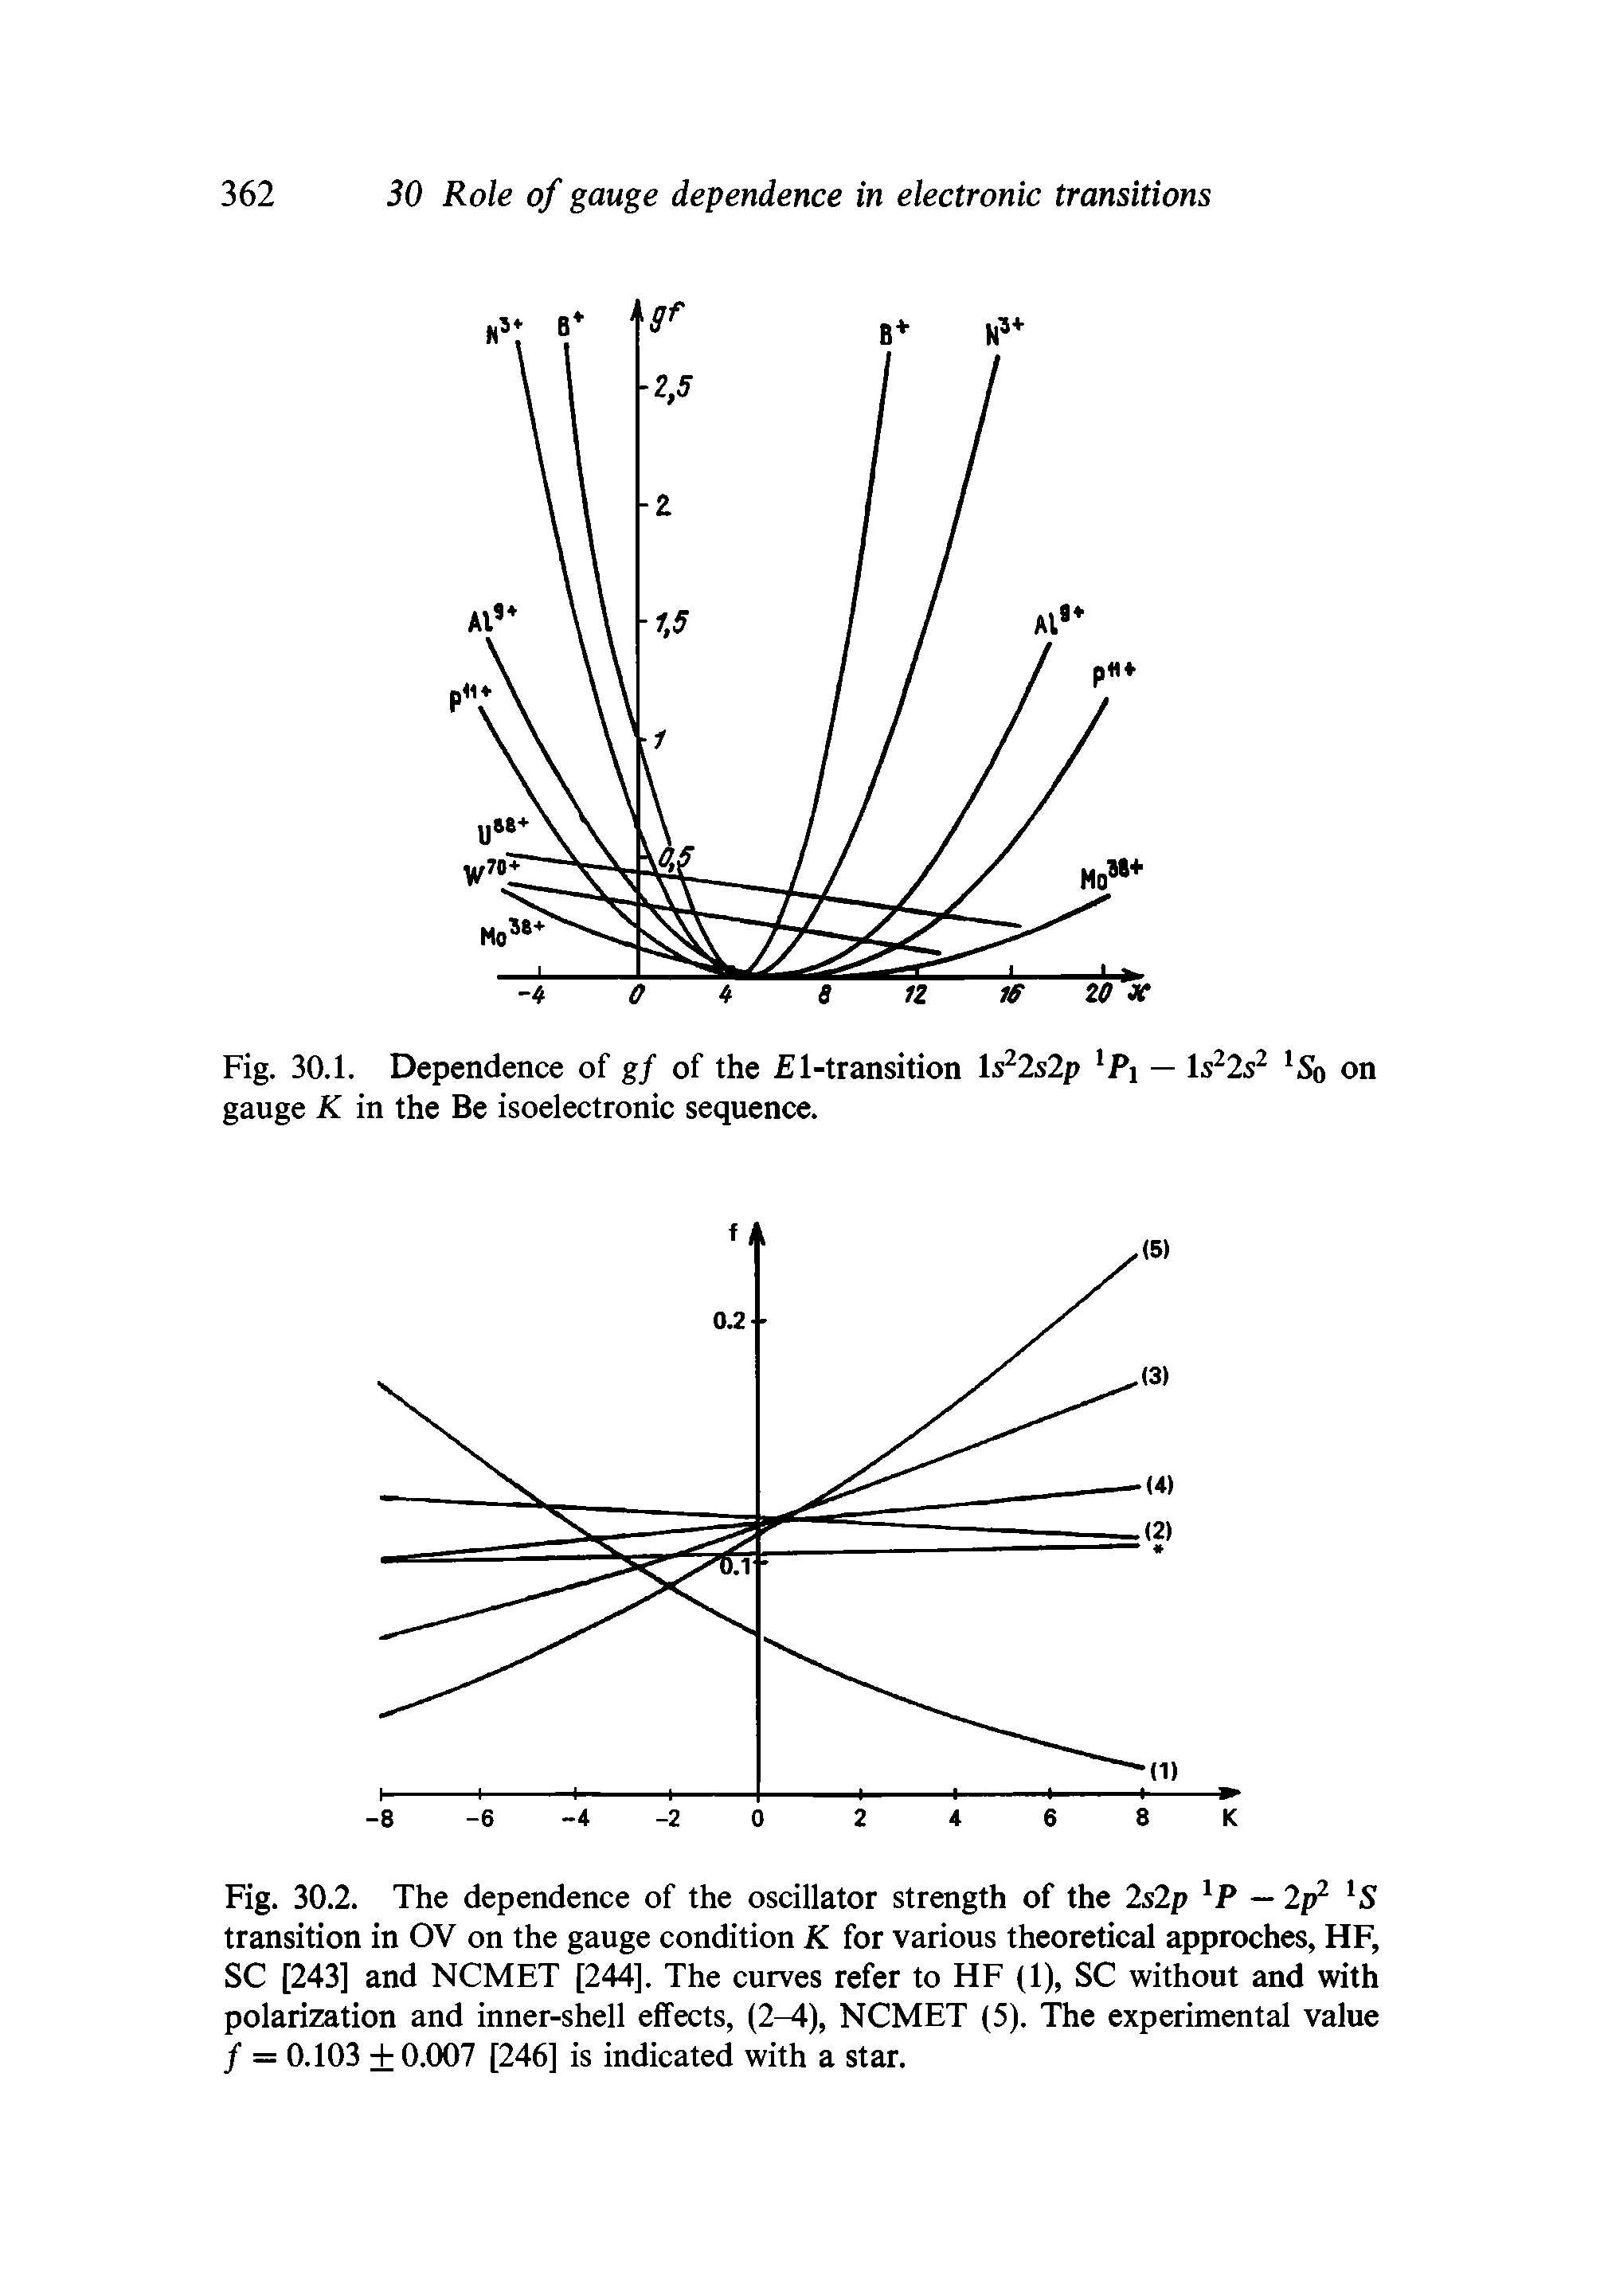 Fig. 30.2. The dependence of the oscillator strength of the 2s2p 1P — Ip1 lS transition in OV on the gauge condition K for various theoretical approches, HF, SC [243] and NCMET [244], The curves refer to HF (1), SC without and with polarization and inner-shell effects, (2-4), NCMET (5). The experimental value / = 0.103 + 0.007 [246] is indicated with a star.